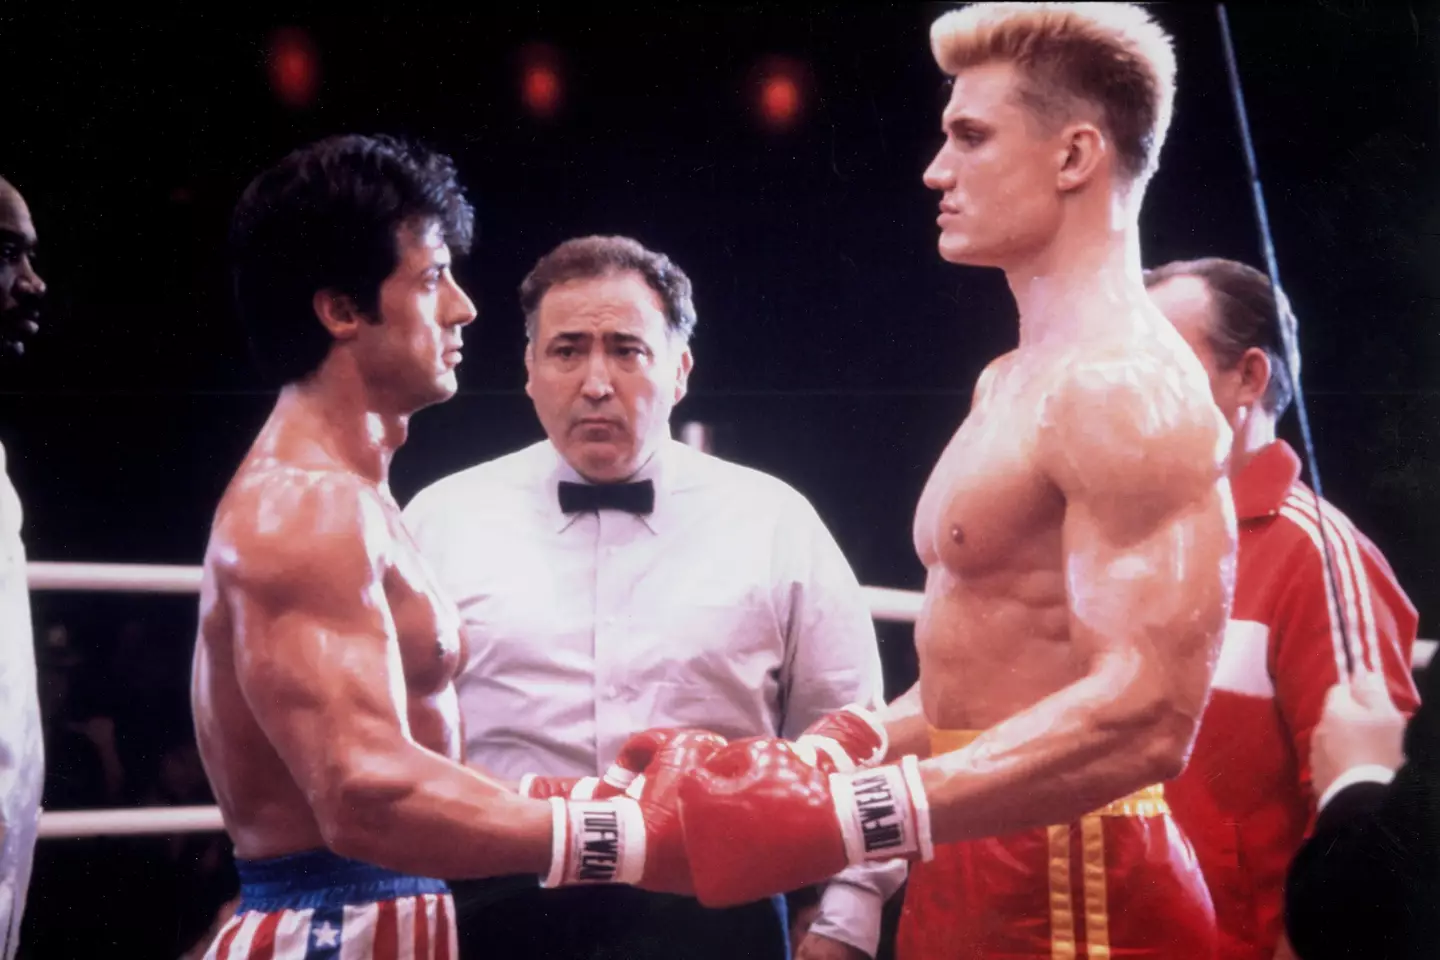 Sylvester Stallone and Dolph Lundgren first starred together in Rocky IV.